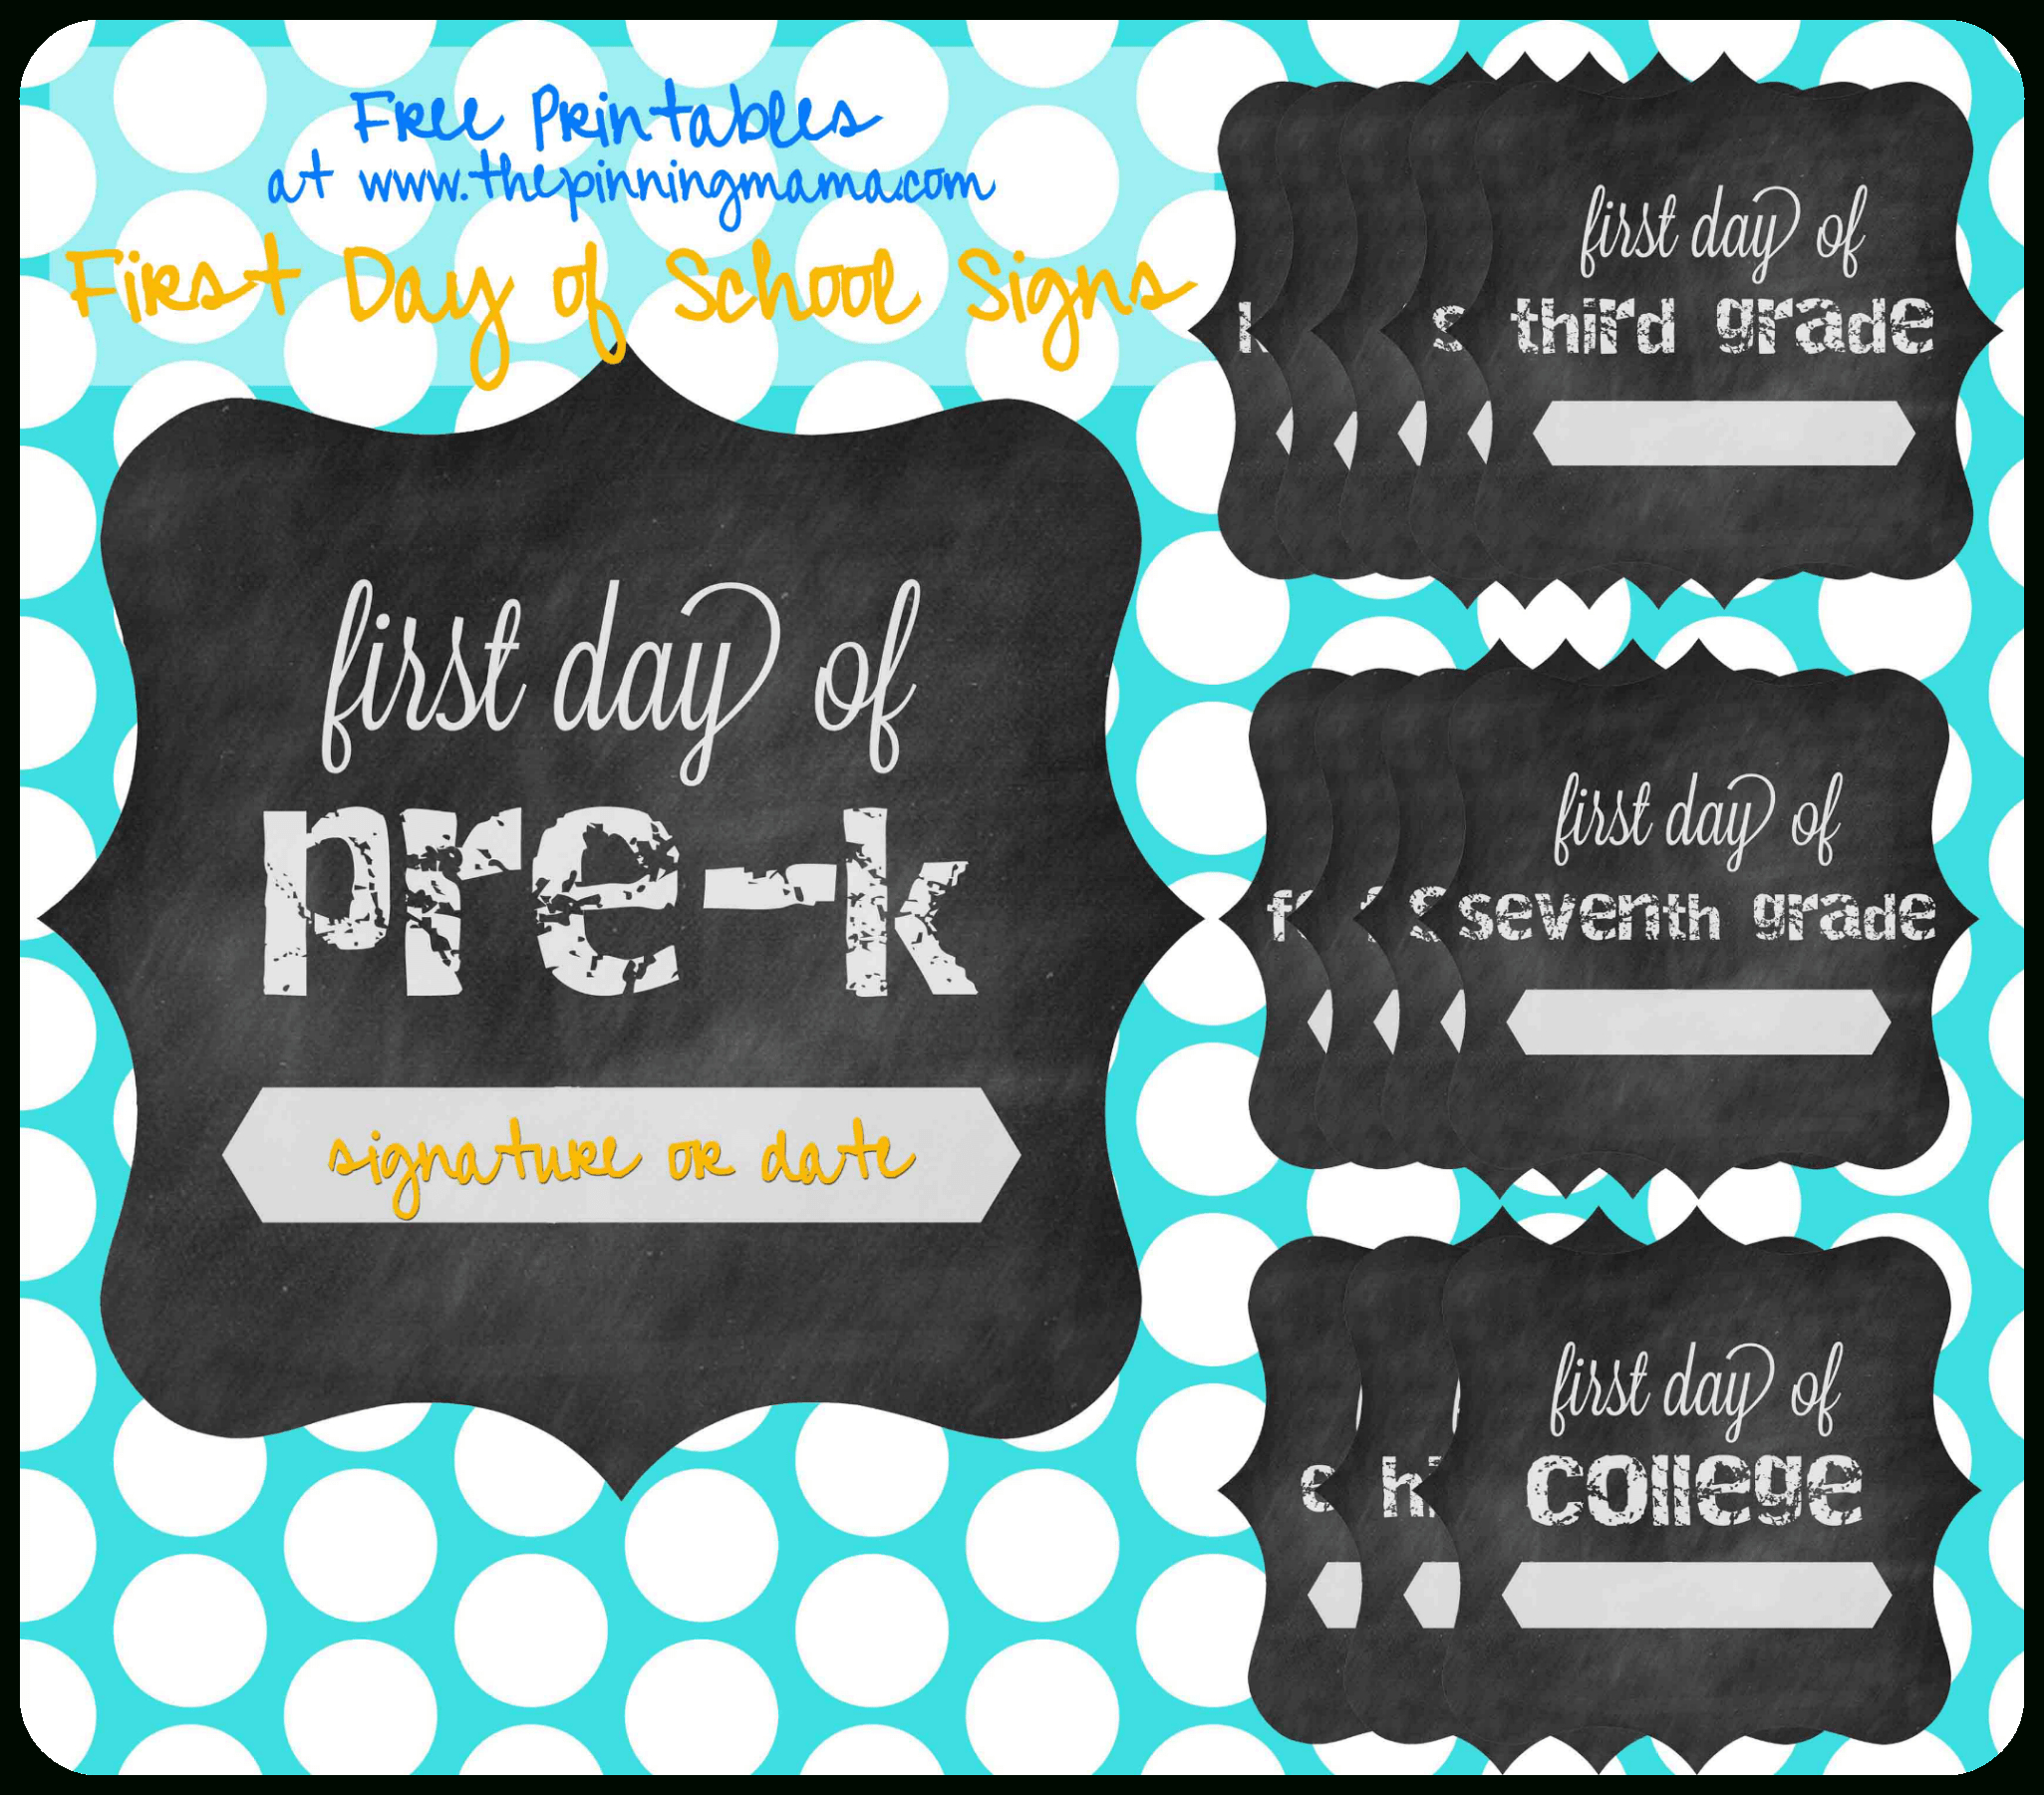 Free Printable} First Day Of School Chalkboard Sign • The Pinning Mama - First Day Of School Printable Free